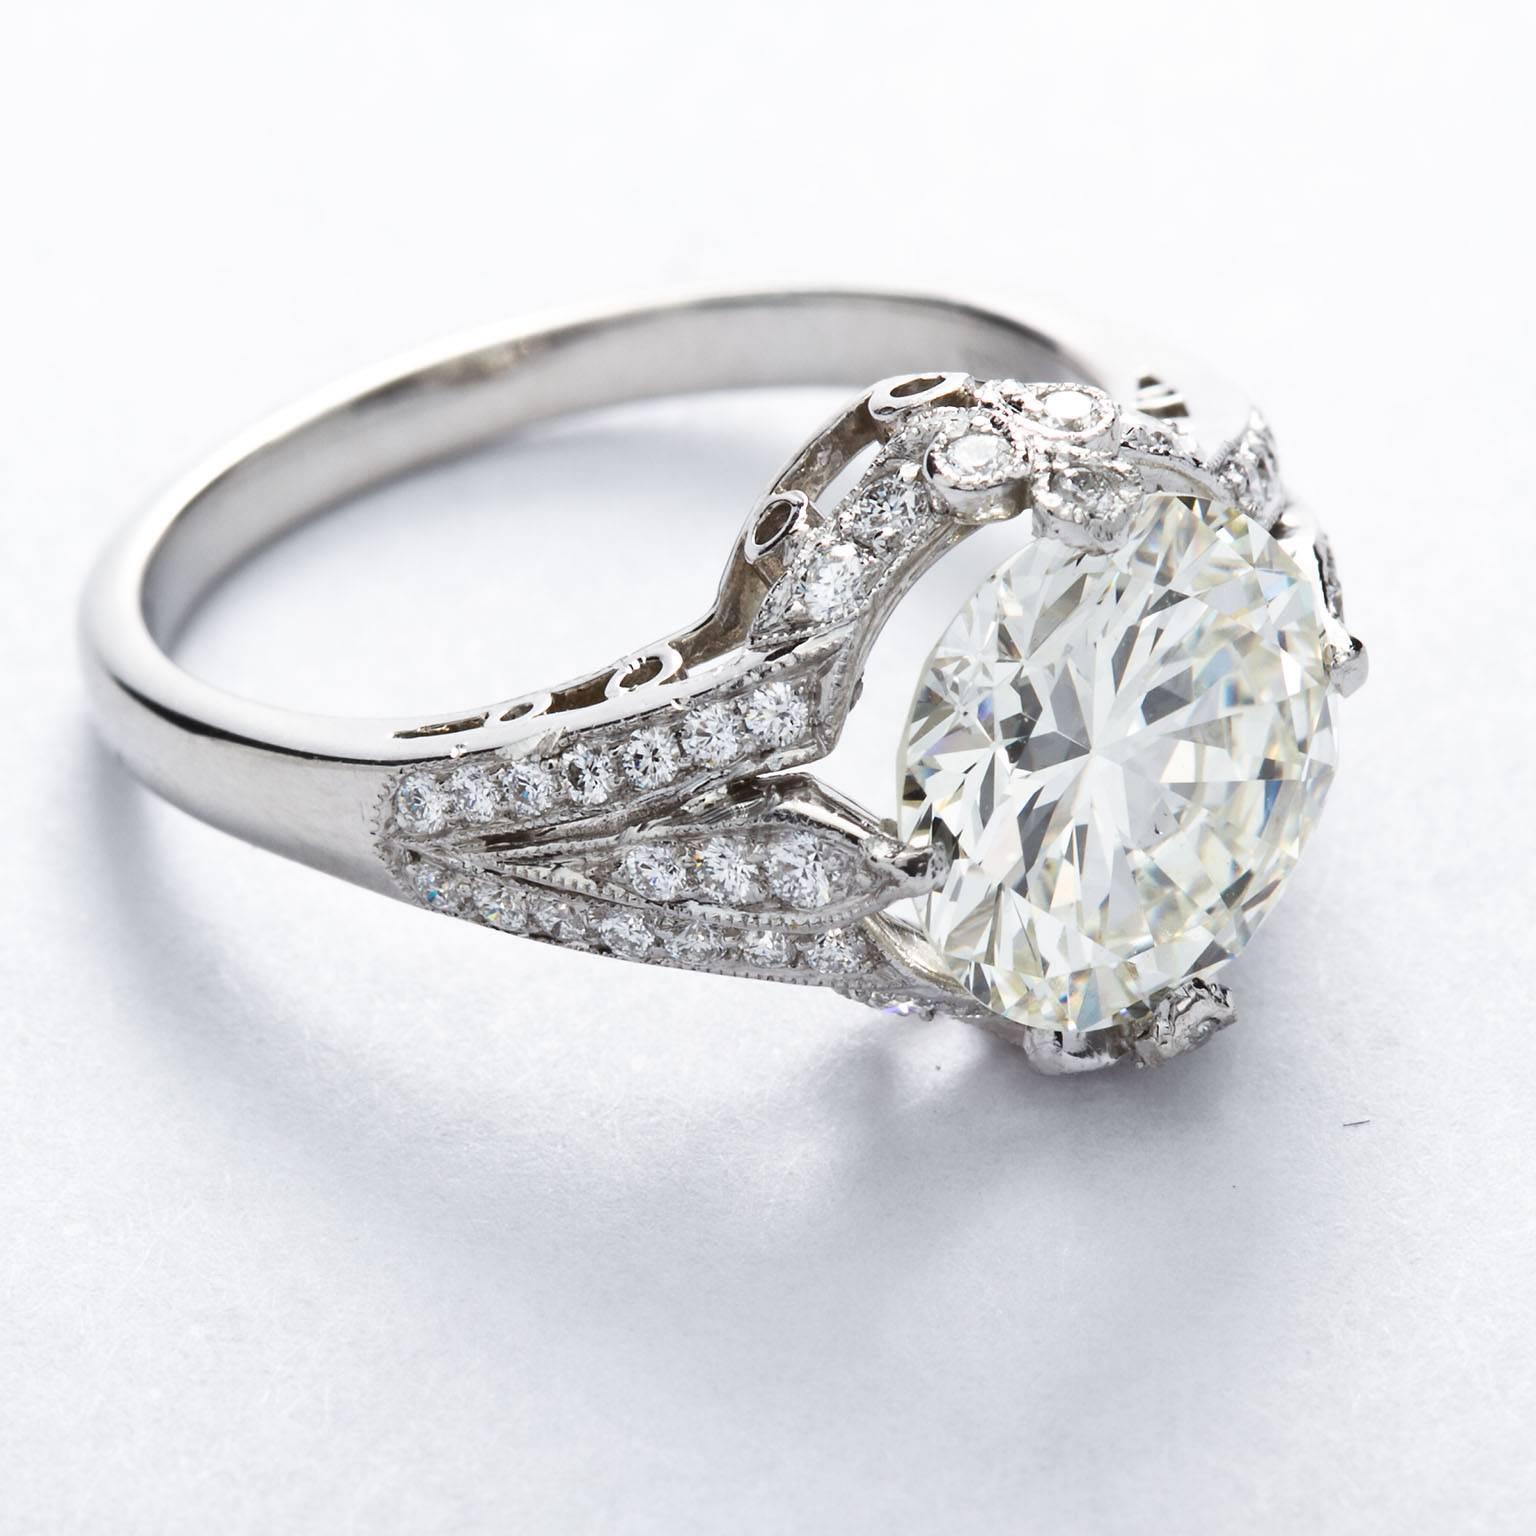 A two carat diamond set in a platinum and diamond ring with delicate millgraining and filigree work.  Ring size 6 (resizable from 3-10).

No. M7714